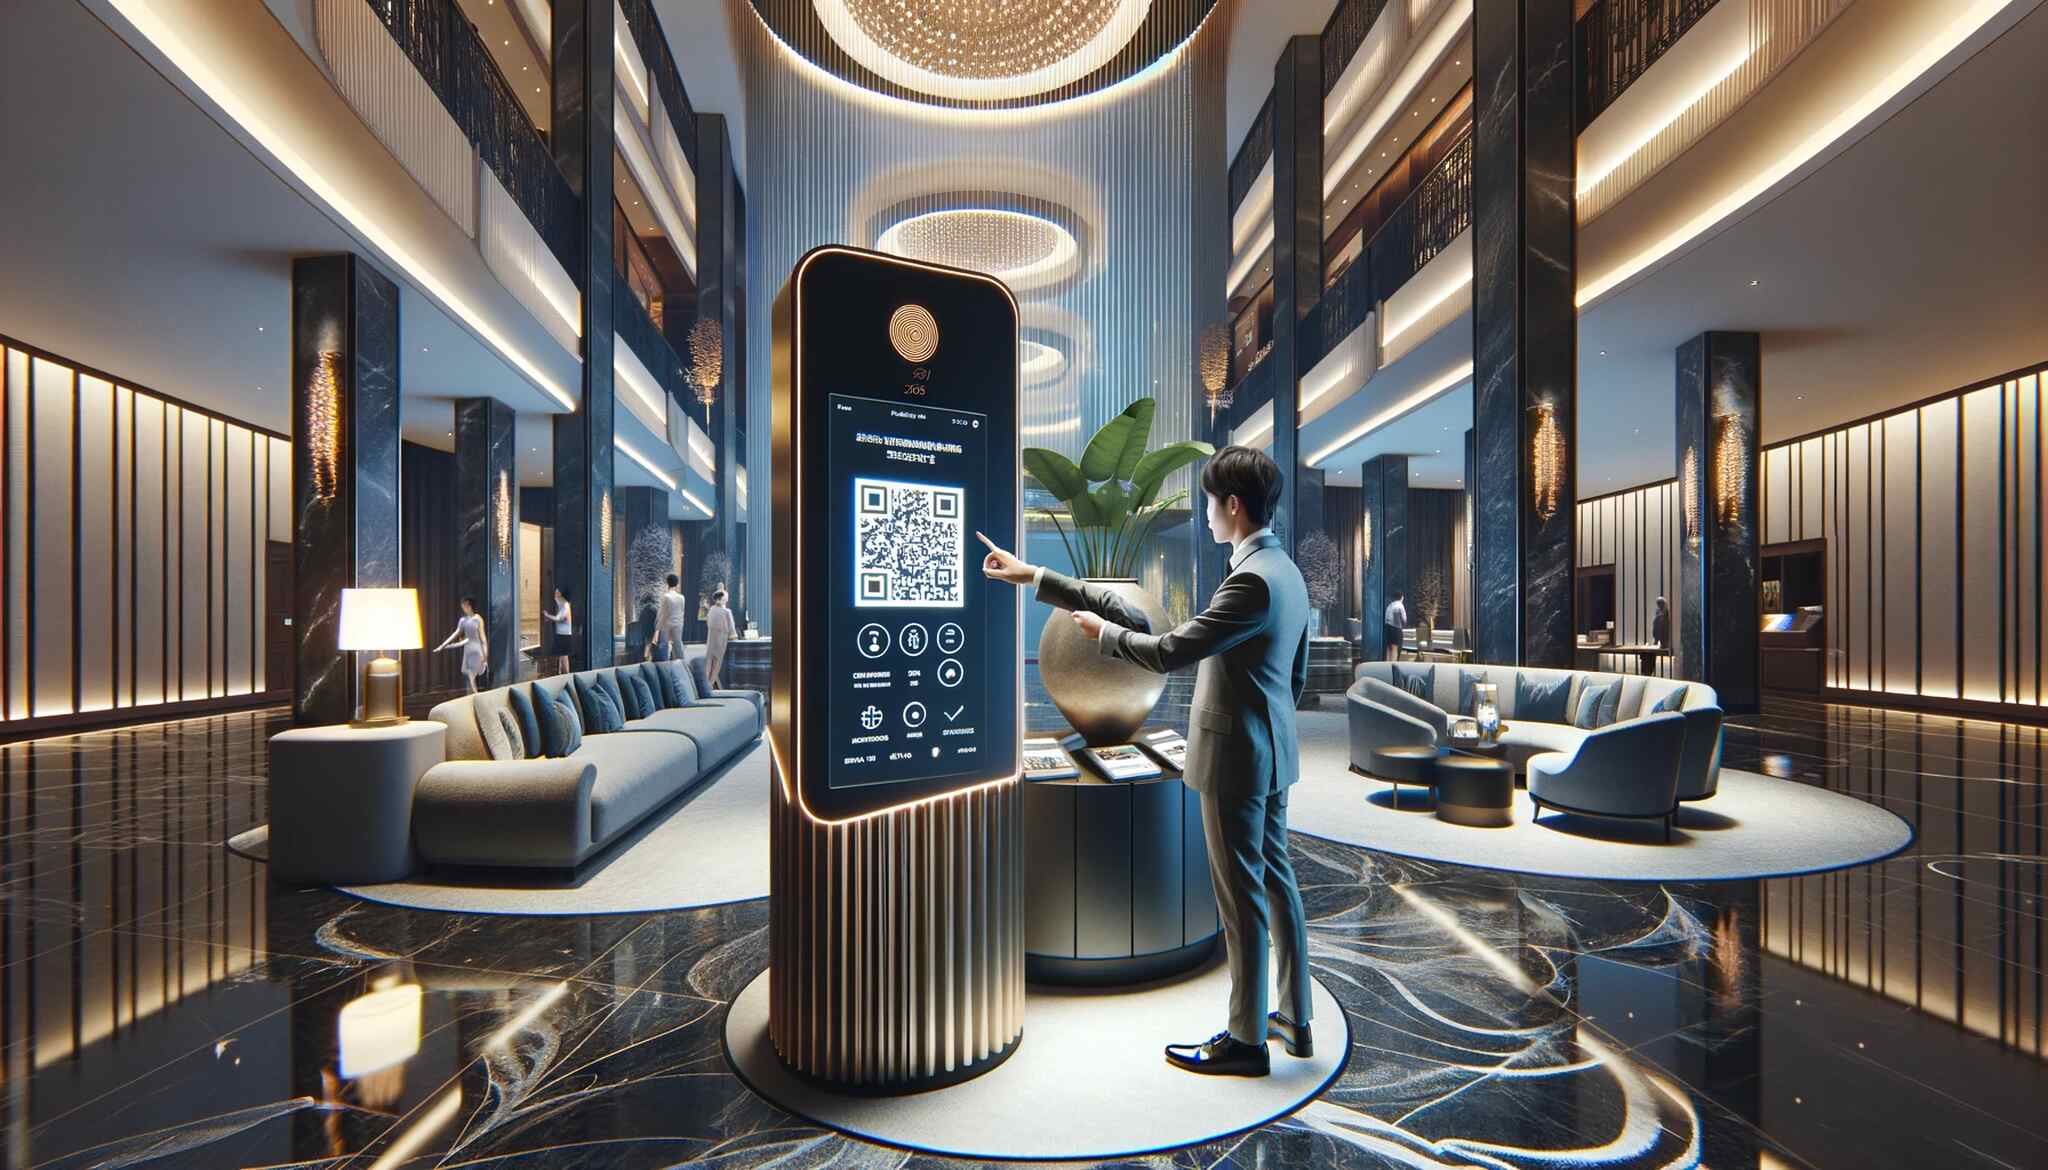 A luxurious hotel reception area featuring a QR code